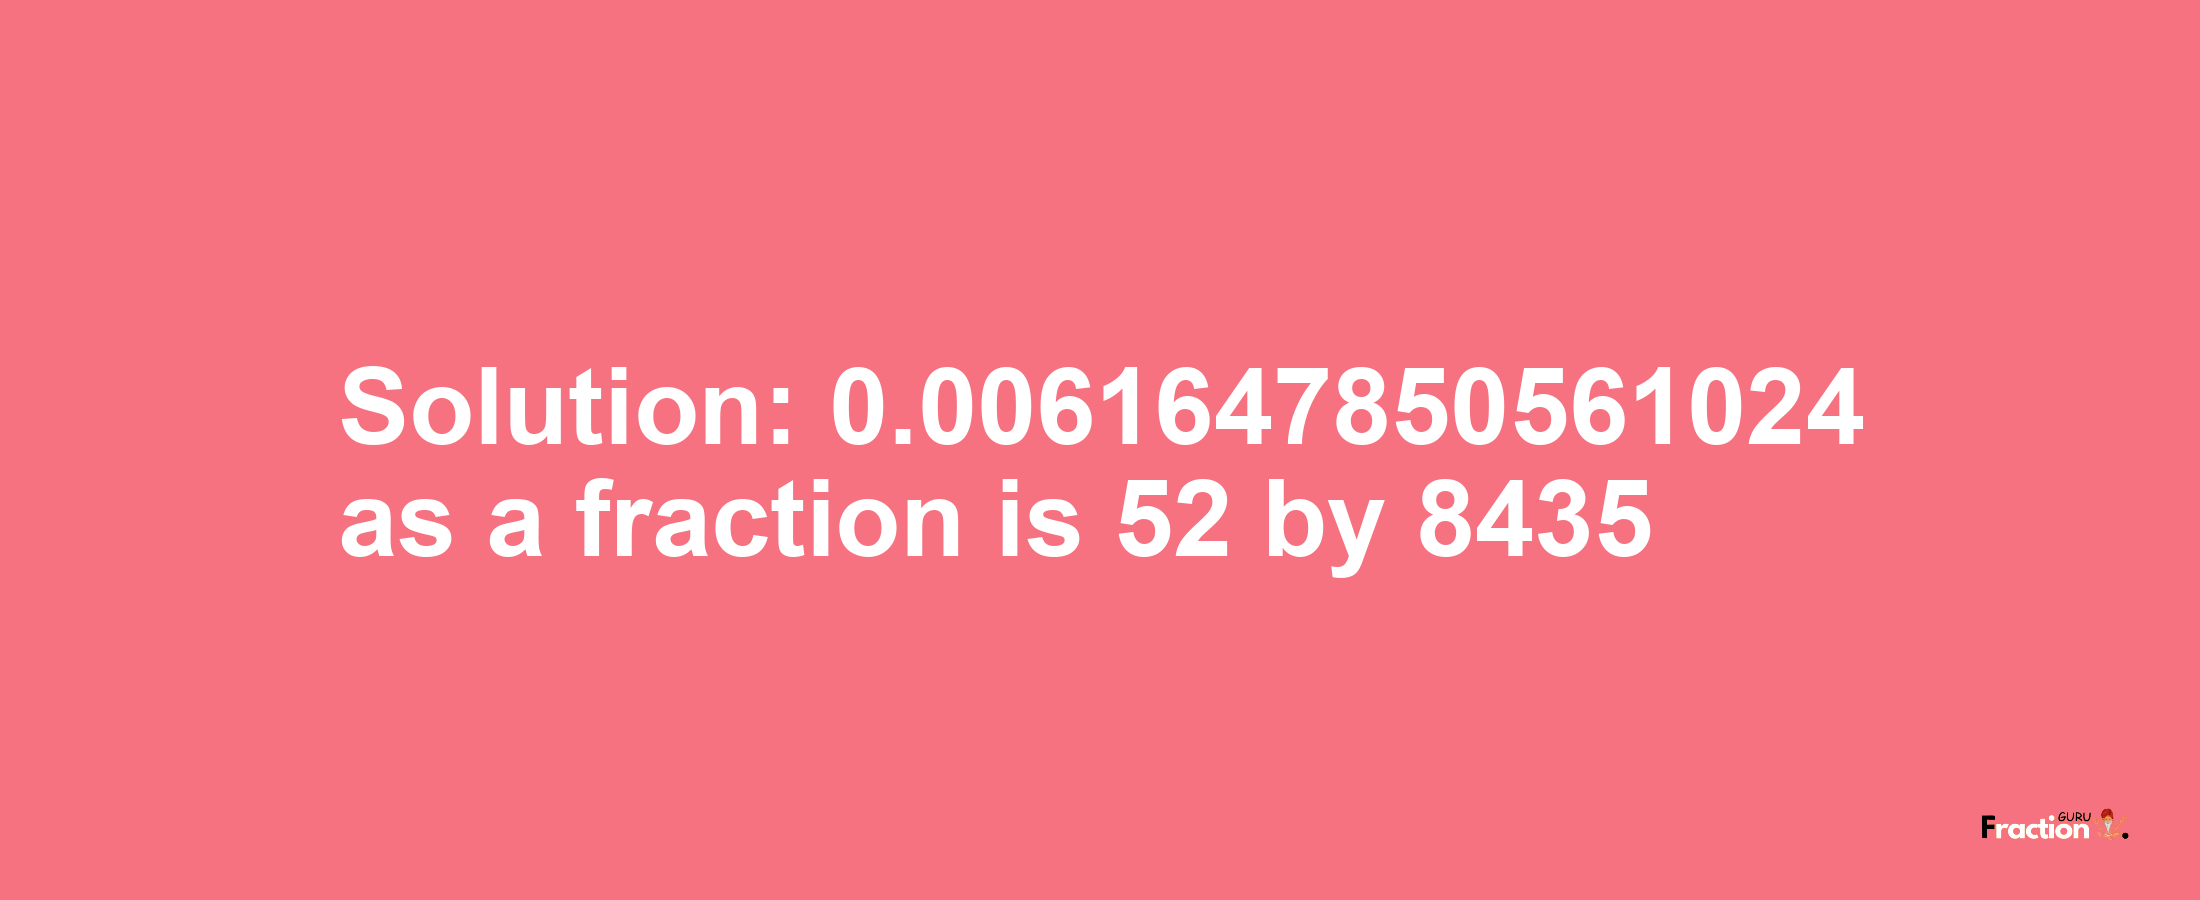 Solution:0.0061647850561024 as a fraction is 52/8435